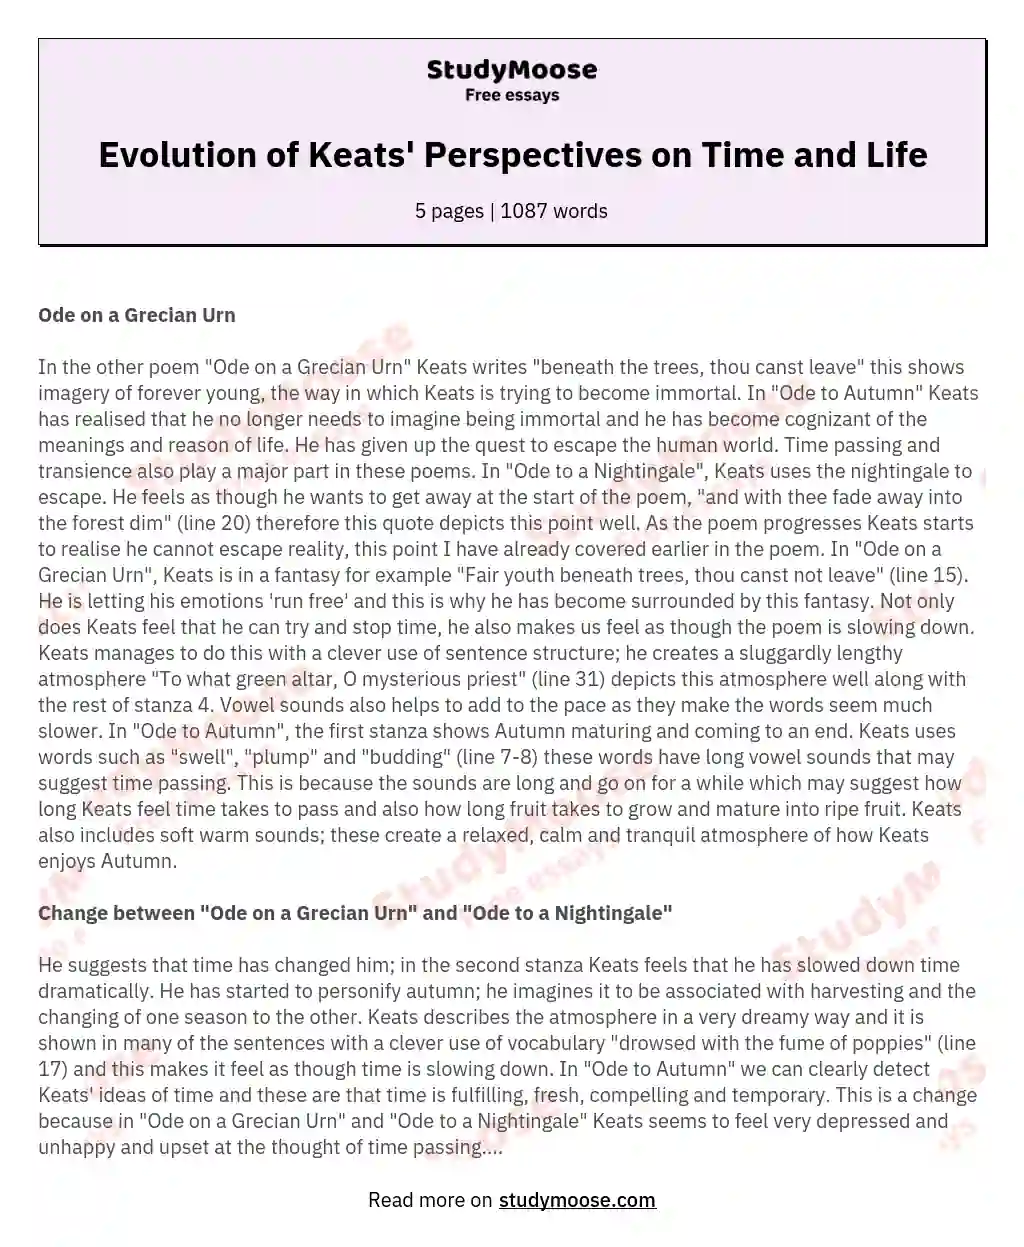 Evolution of Keats' Perspectives on Time and Life essay